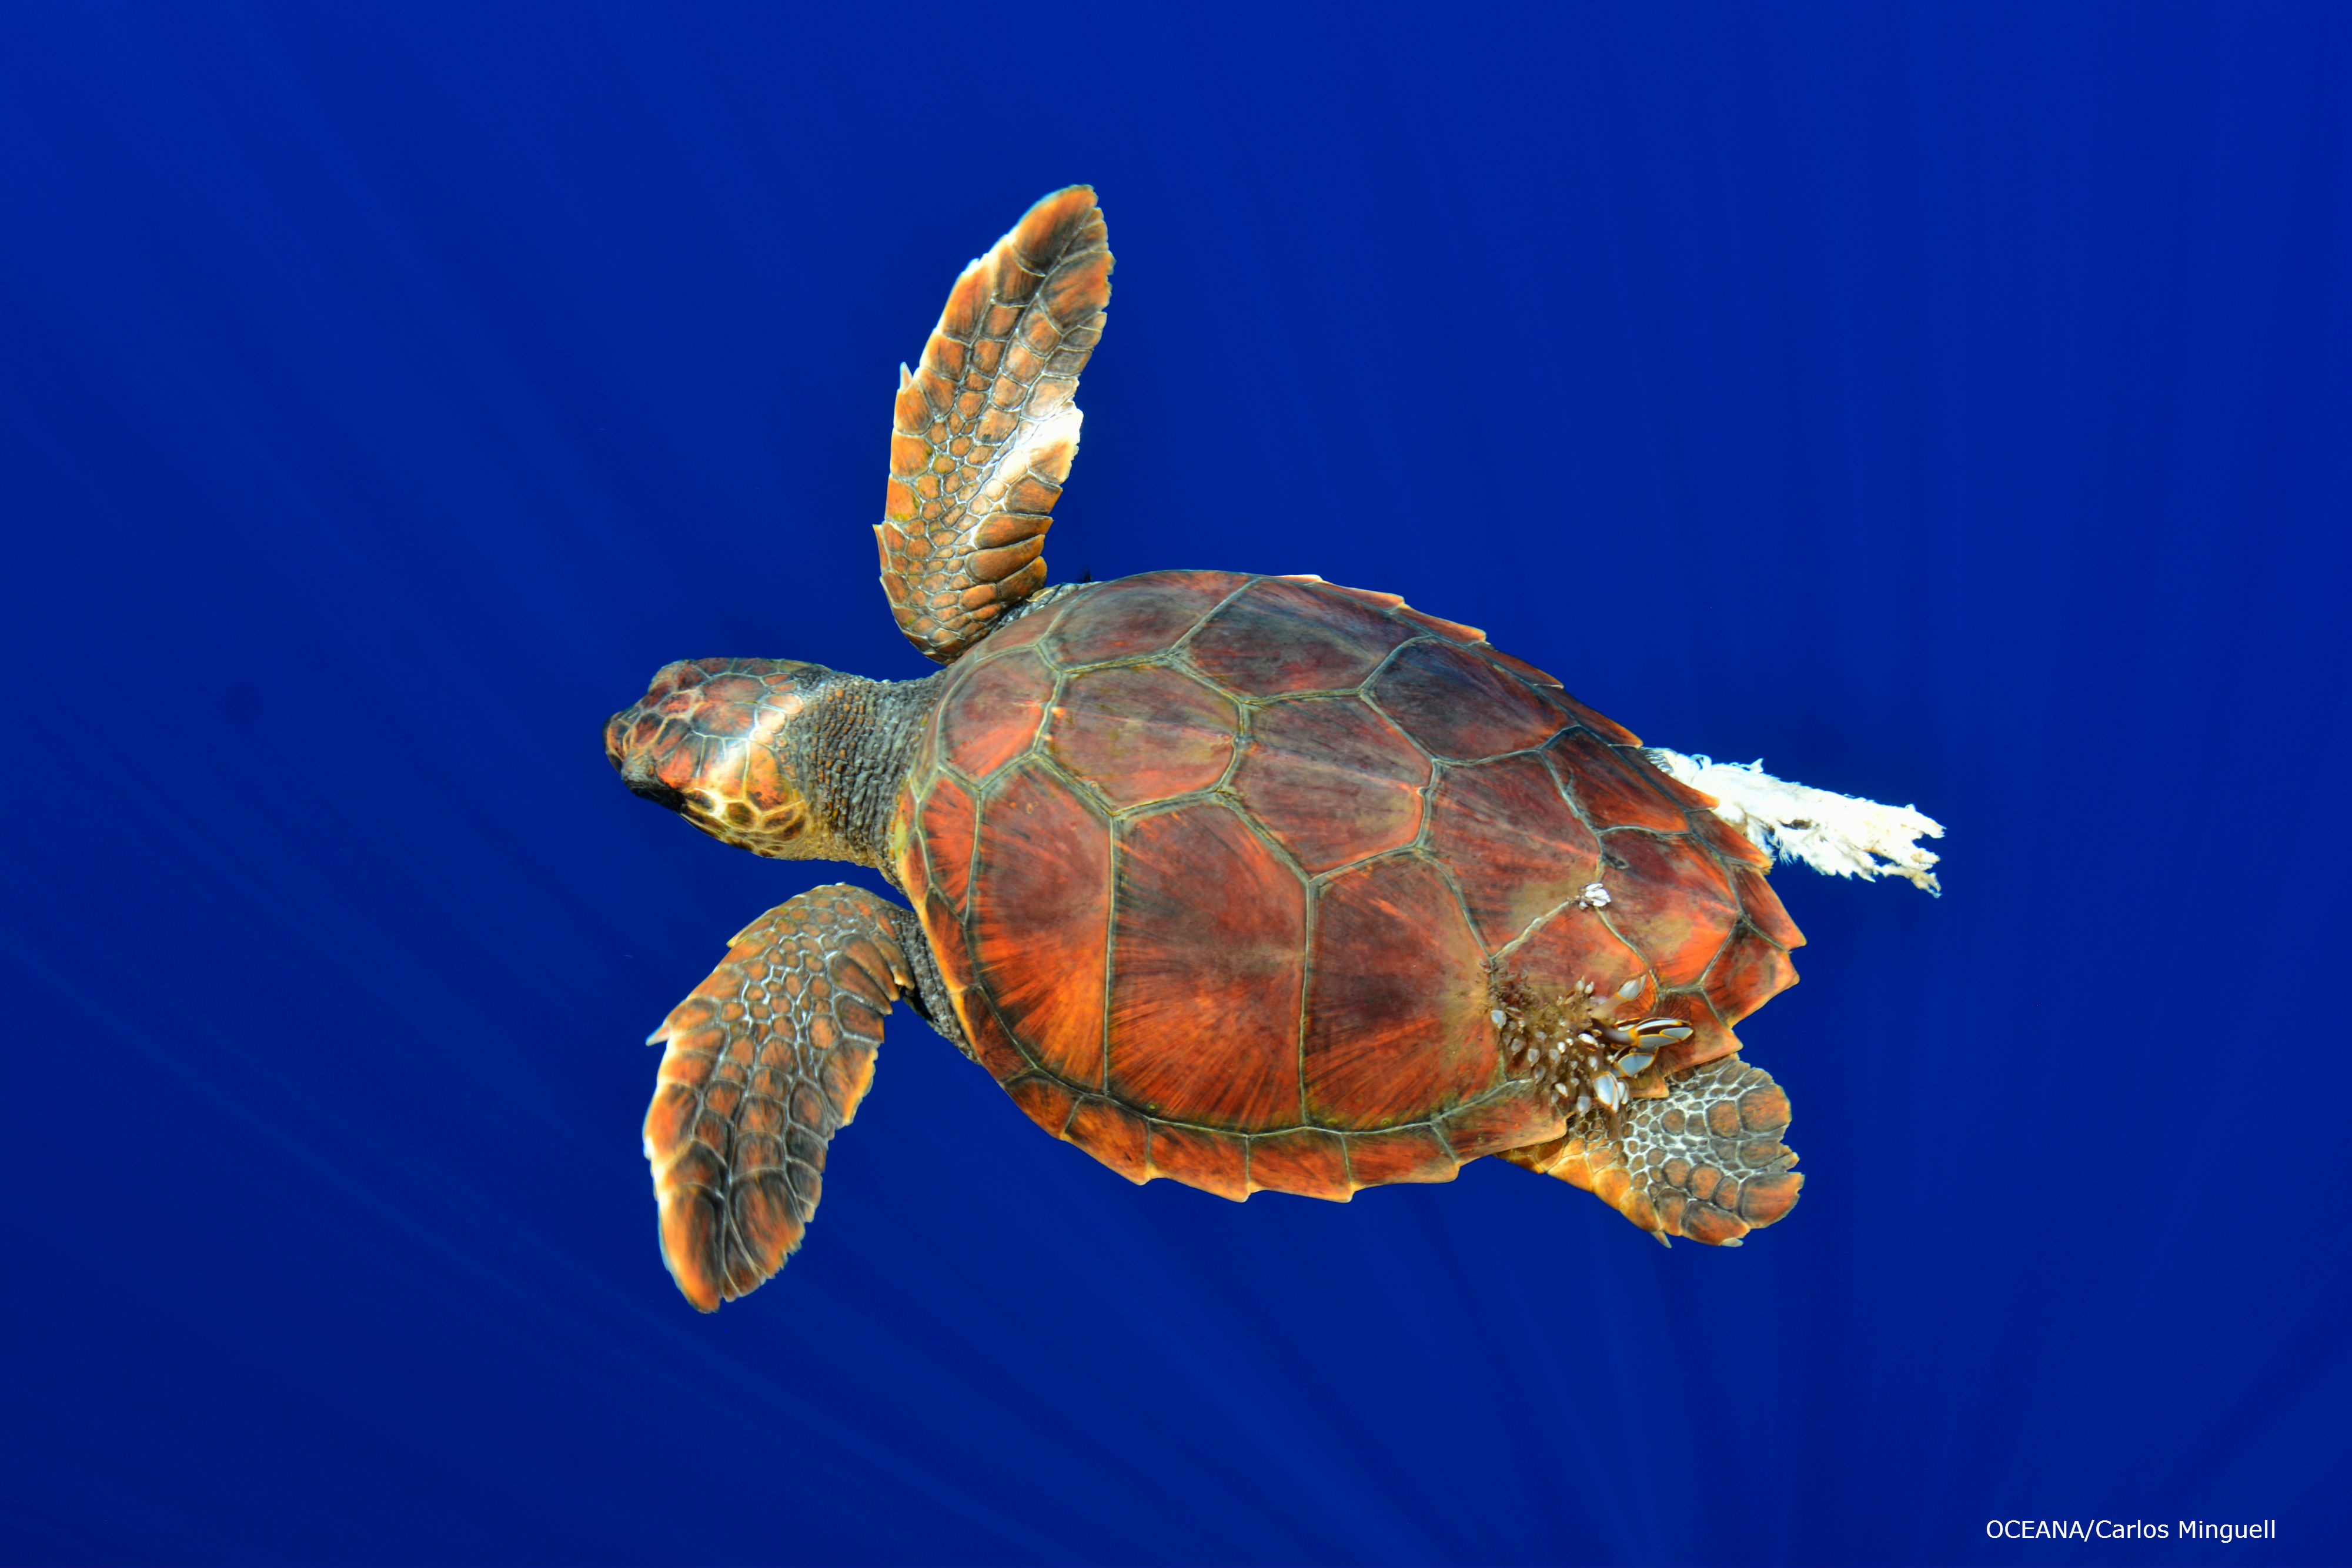 Species Profile: Which Sea Turtles Are Most At-Risk for Fisheries ...